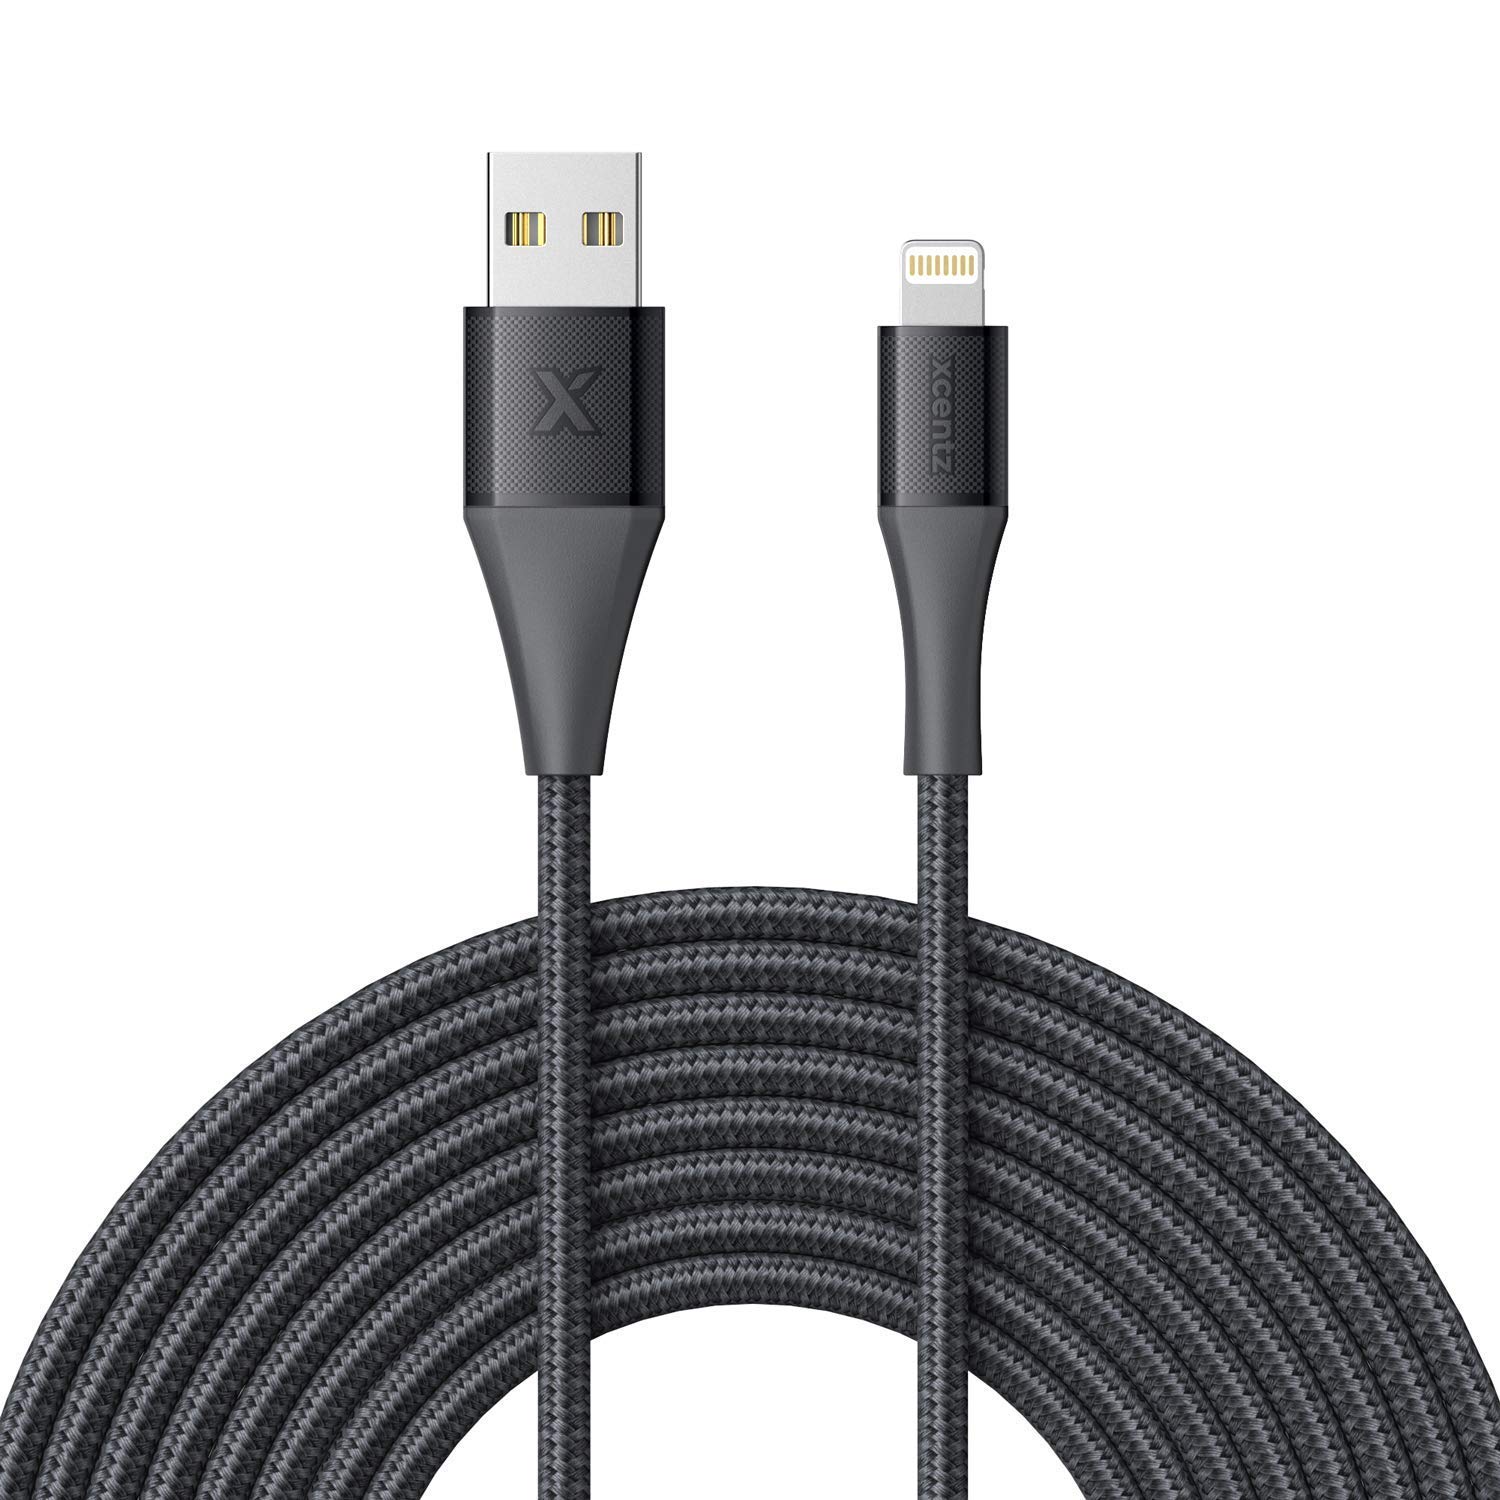 Book Cover XCENTZ iPhone Charger 10ft, MFi Certified Lightning Cable, Braided Nylon High-Speed iPhone Cable with Premium Metal Connector for iPhone 11/X/XS/XR/XS Max/8/7/6/5S/SE, iPad Mini/Air, Black